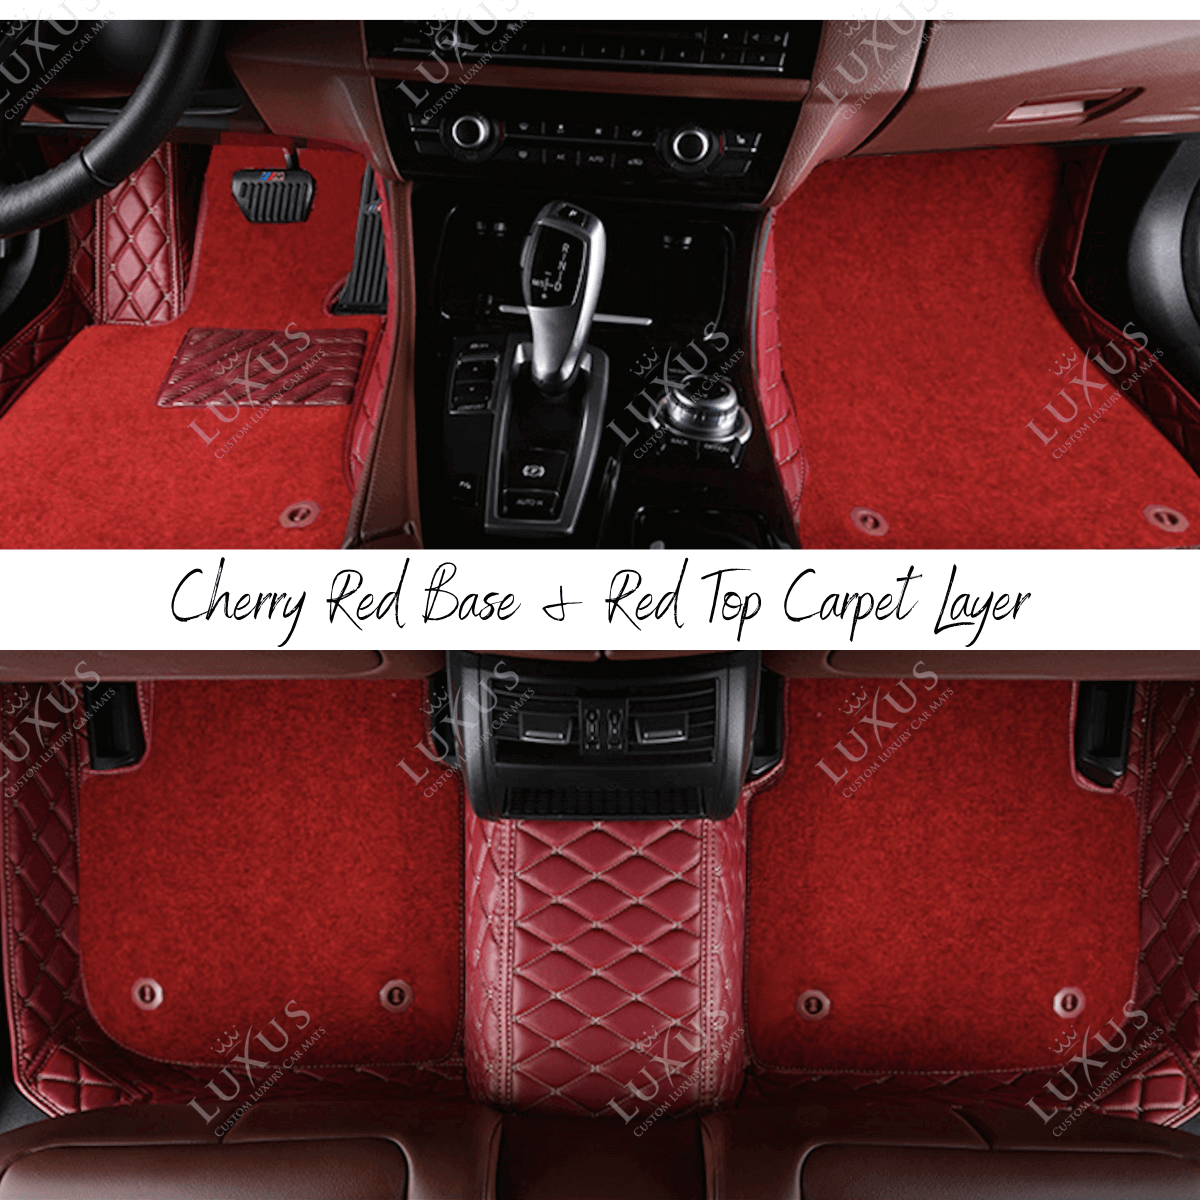 Cherry Red Diamond Base & Red Top Carpet Double Layer Luxury Car Mats Set